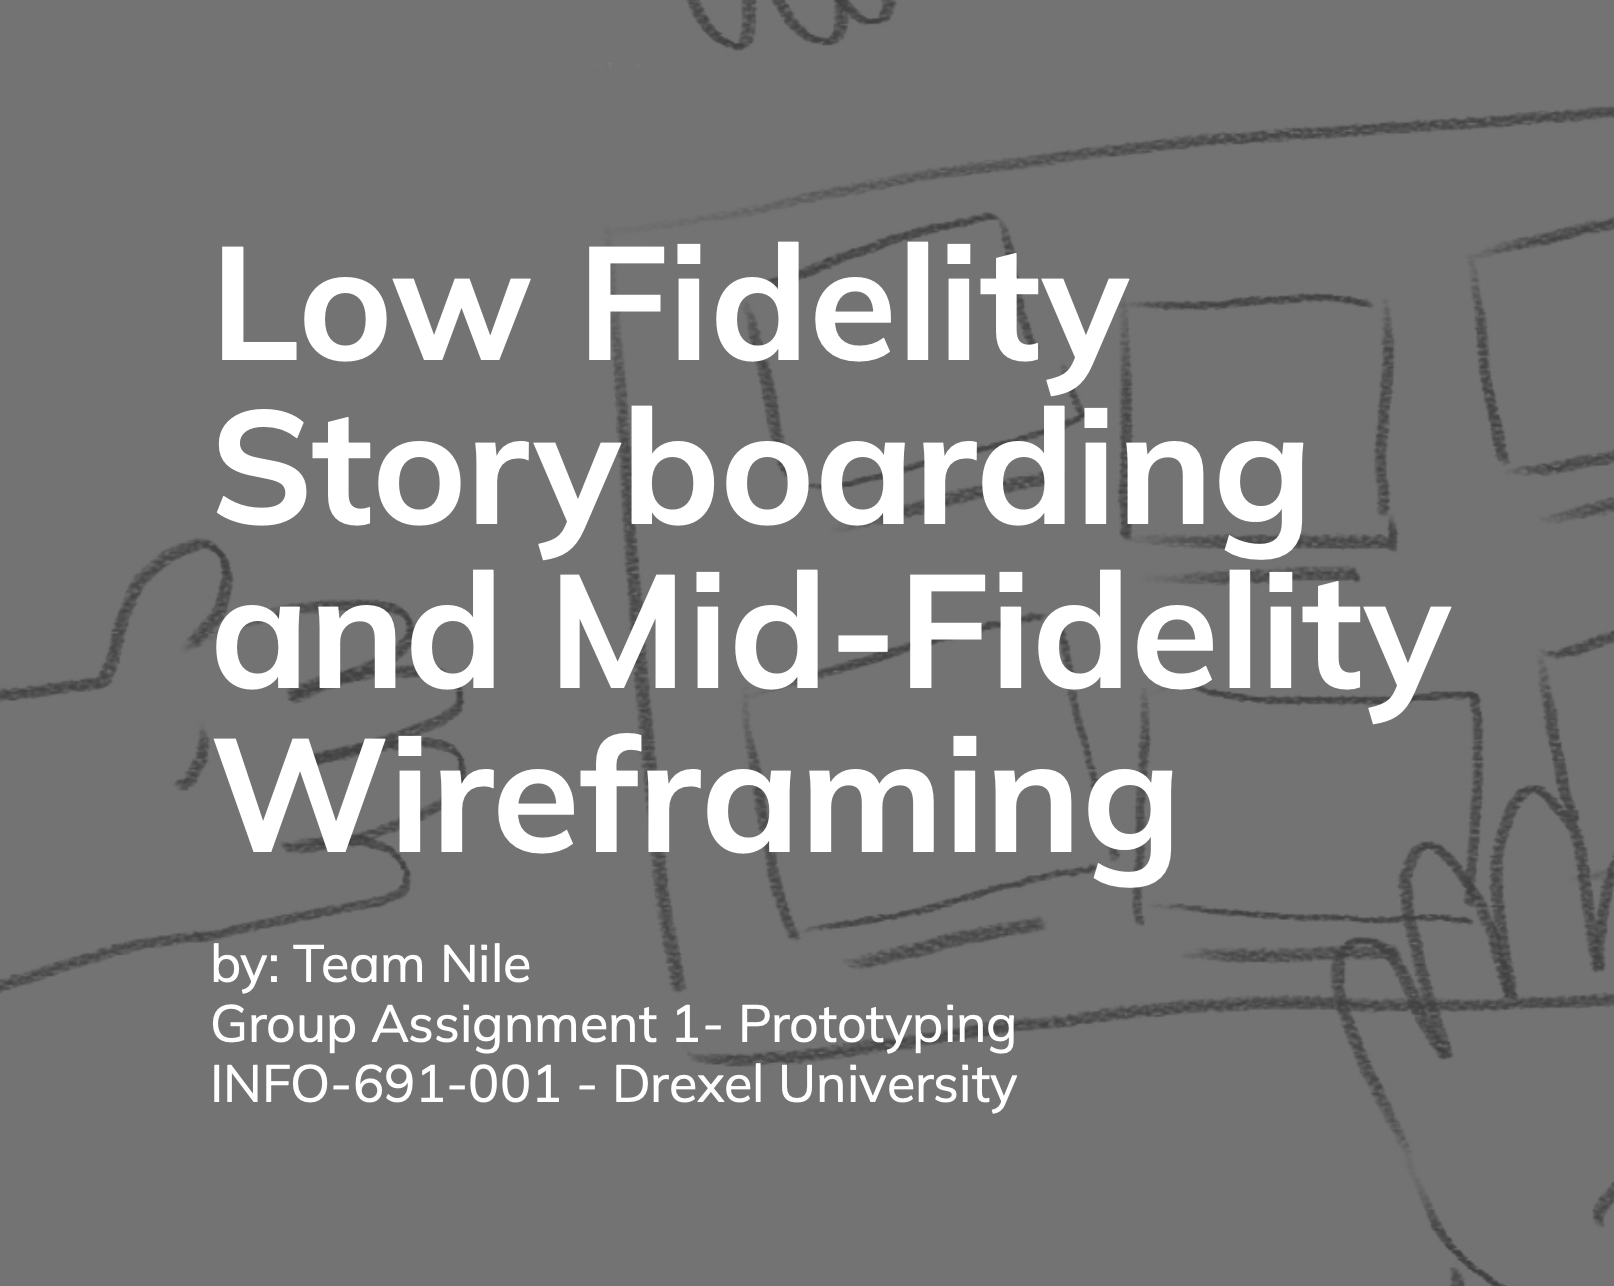 Low Fidelity Storyboarding and Mid-Fidelity Wireframing